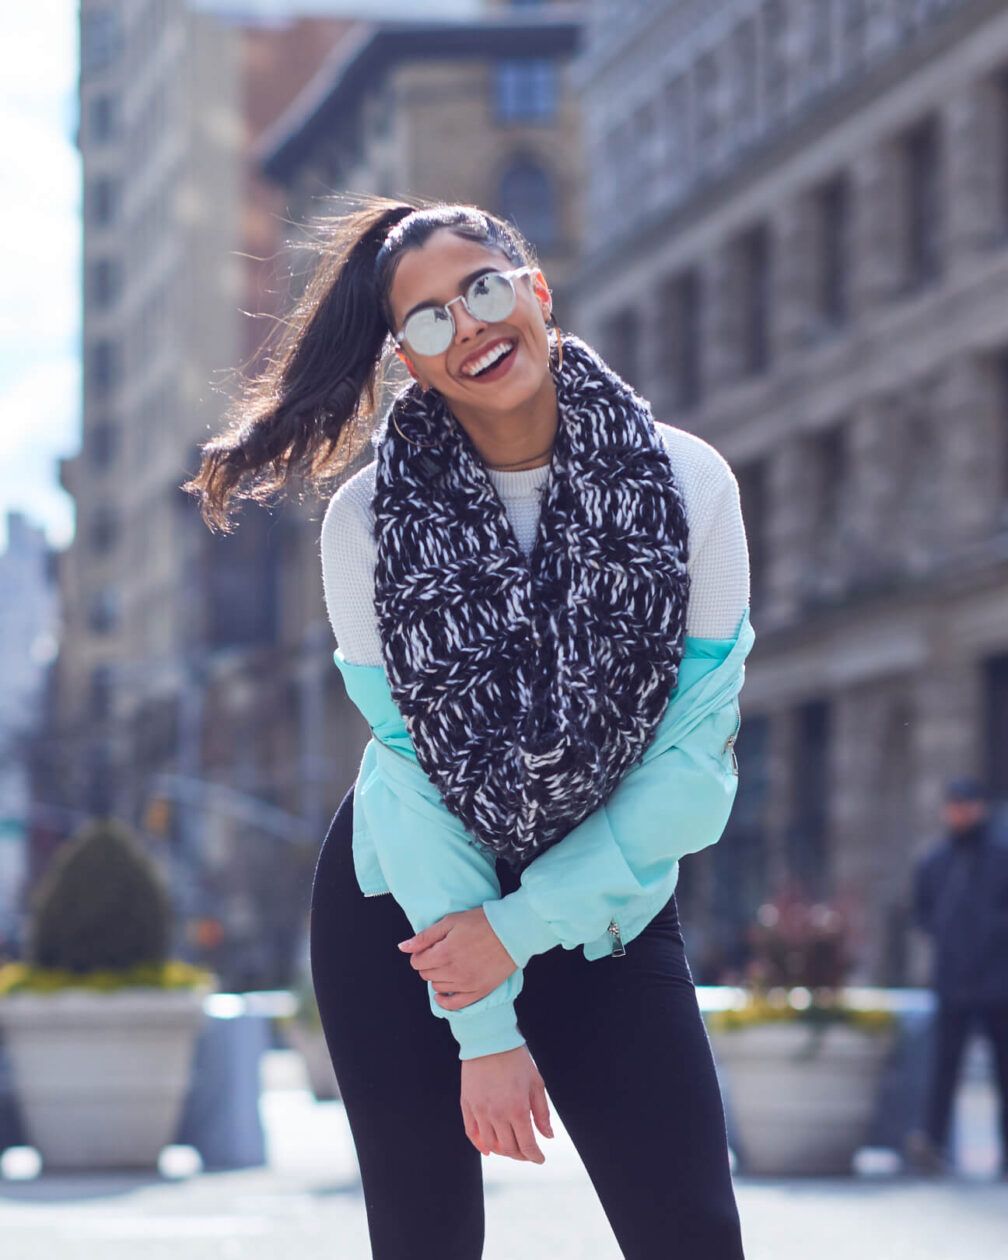 Emily - Flatiron District - Fashion Photography Poses - New York - Woman with a scarf and sunglasses - Portrait Photography Poses - Fuji X Pro2 with xf 56mm f1.2